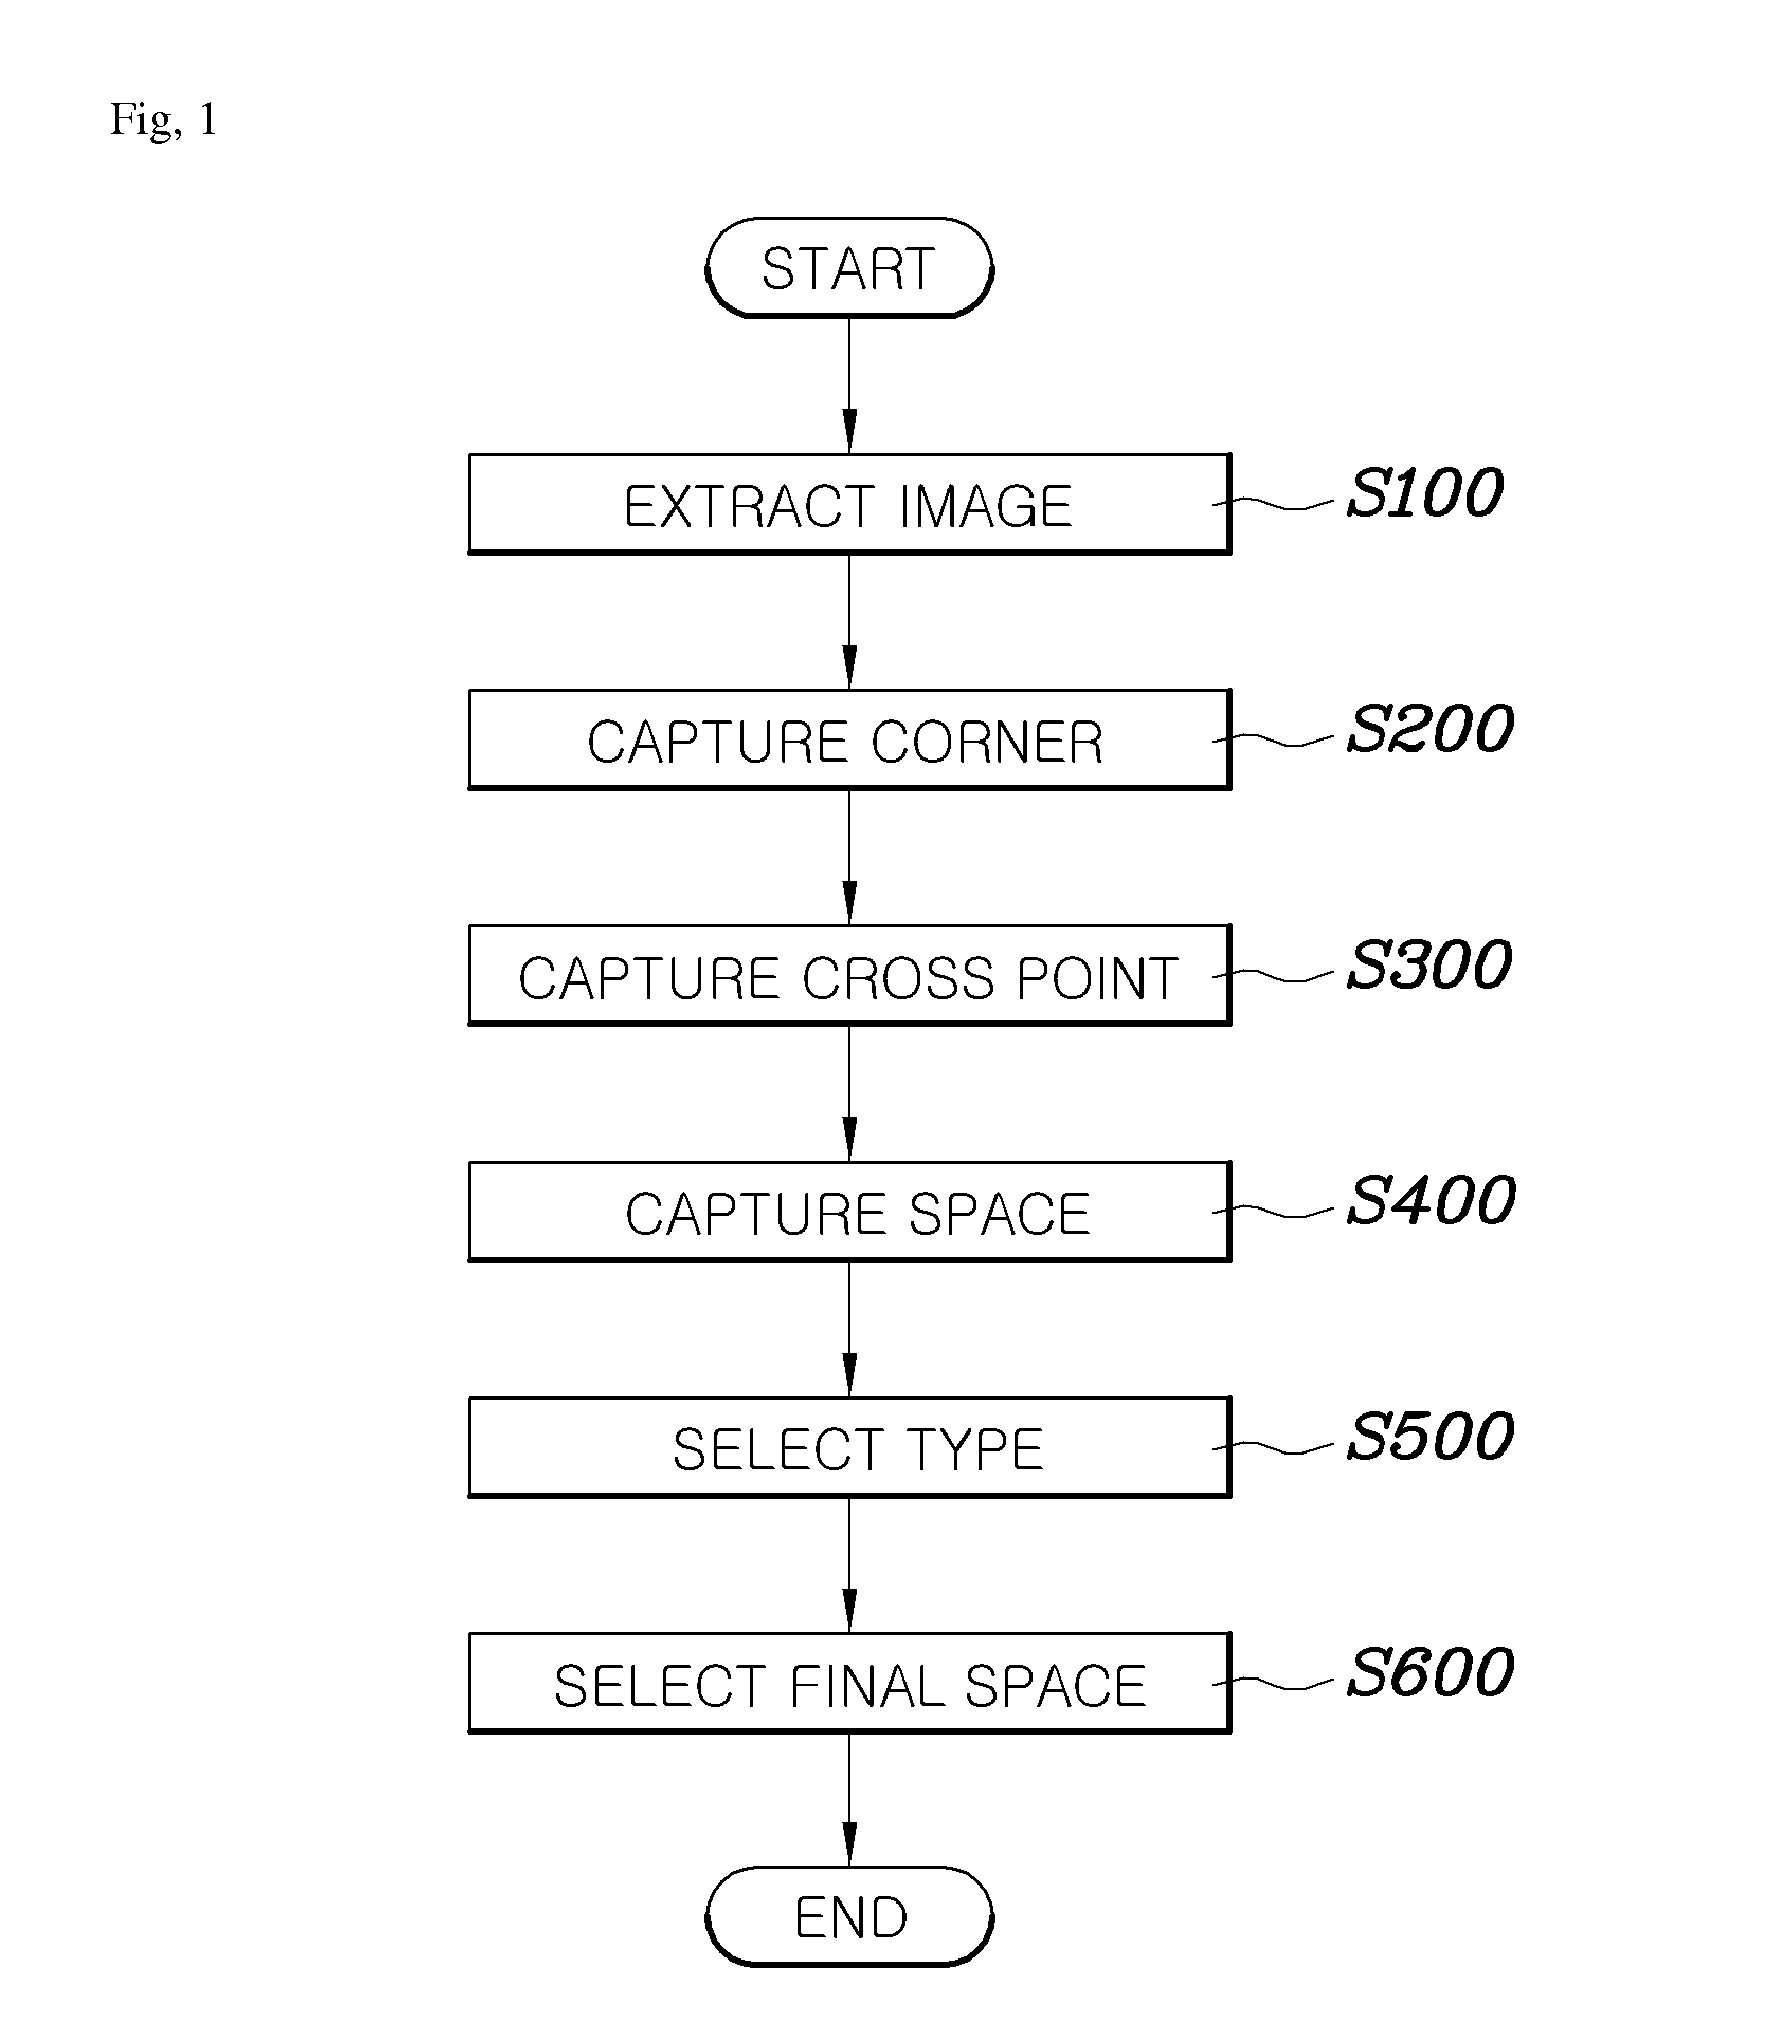 System and method for recognizing parking space line markings for vehicle